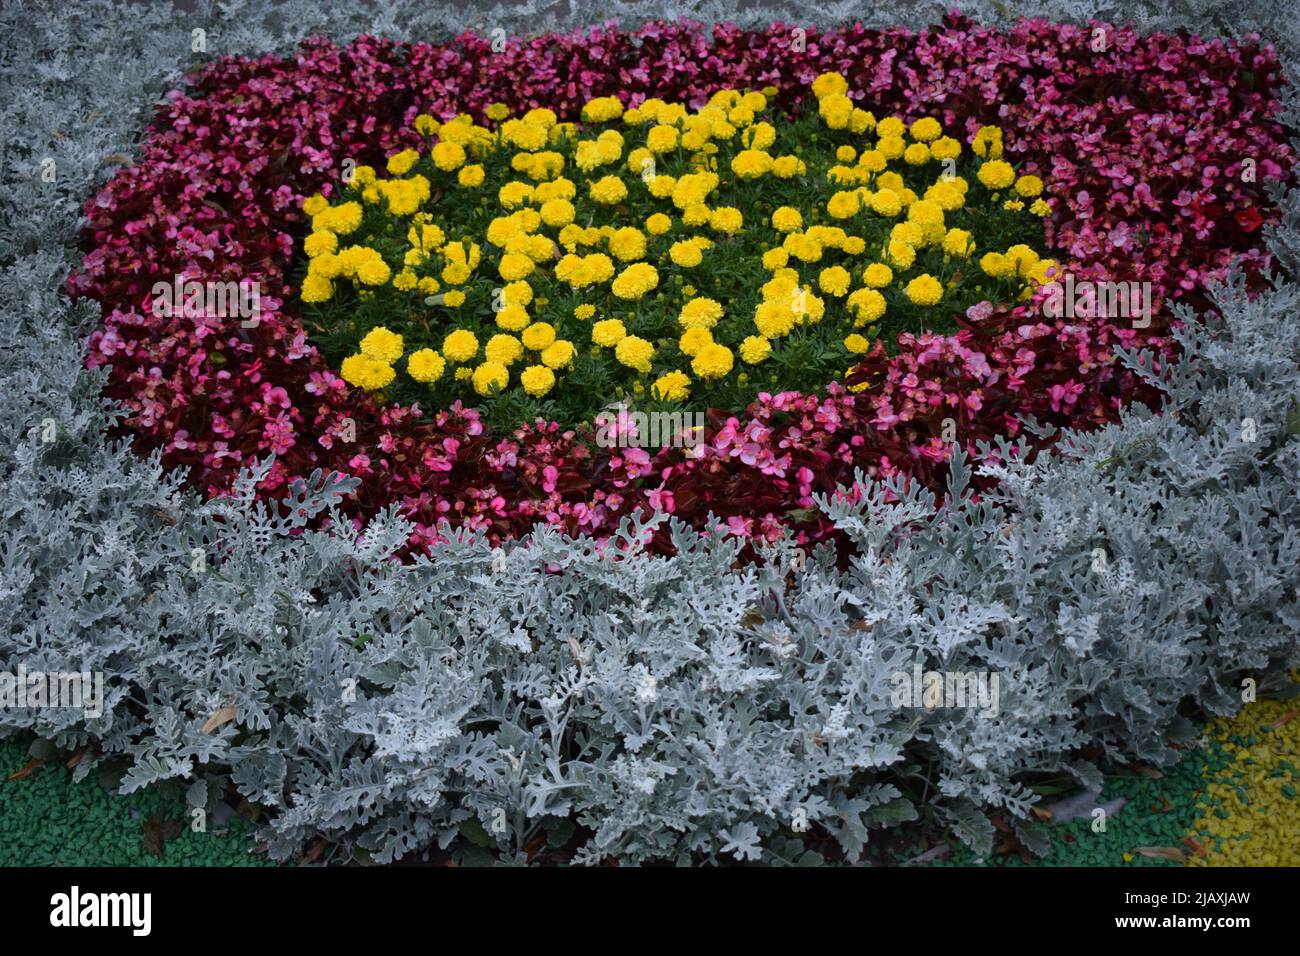 Gardens In Bloom, Landscape Design elements. Flower garden. Landscaping and garden design. Spring blooming in the park. Red and pink begonia and marig Stock Photo